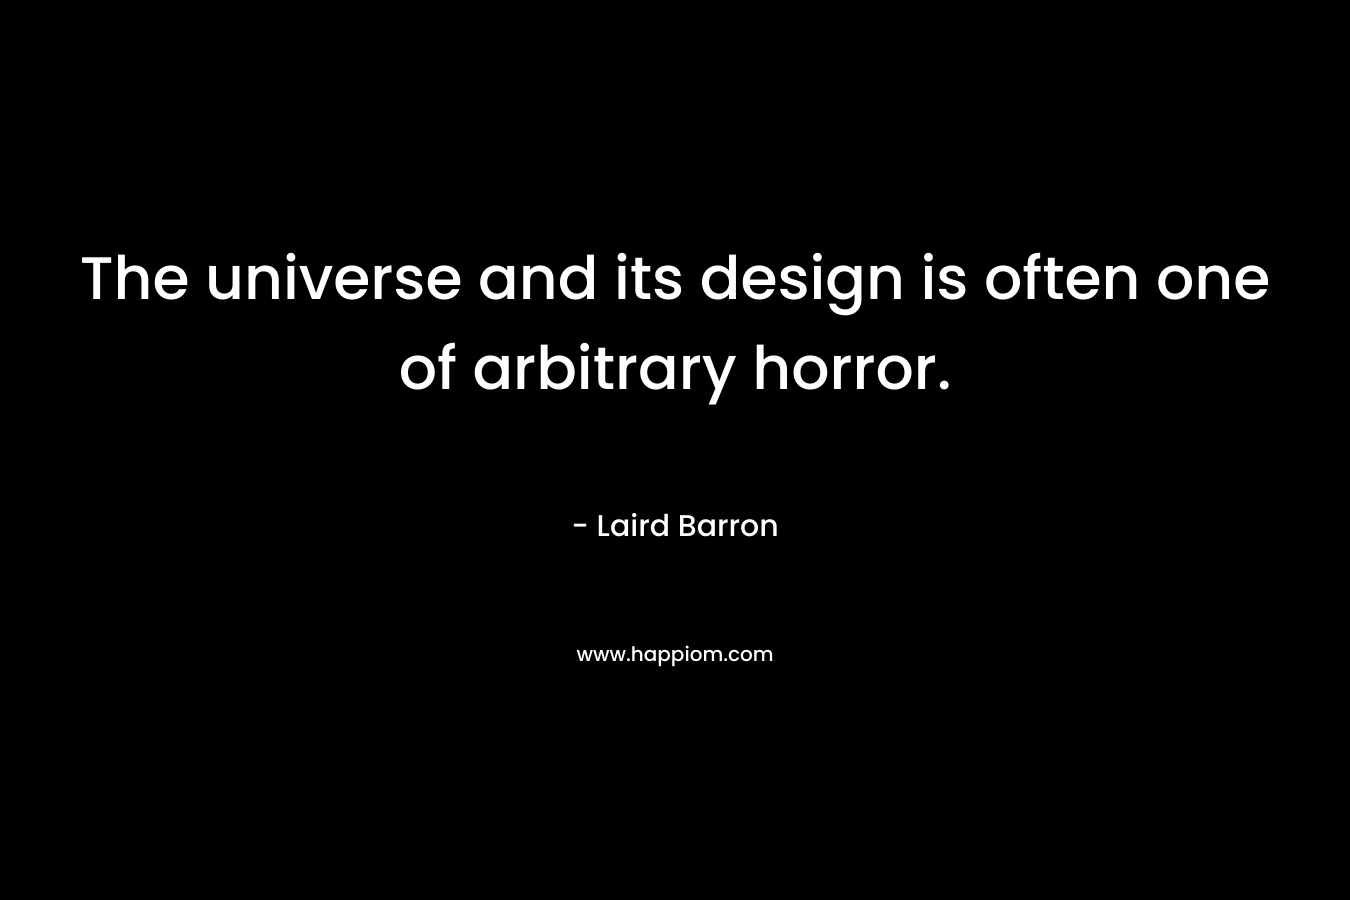 The universe and its design is often one of arbitrary horror.